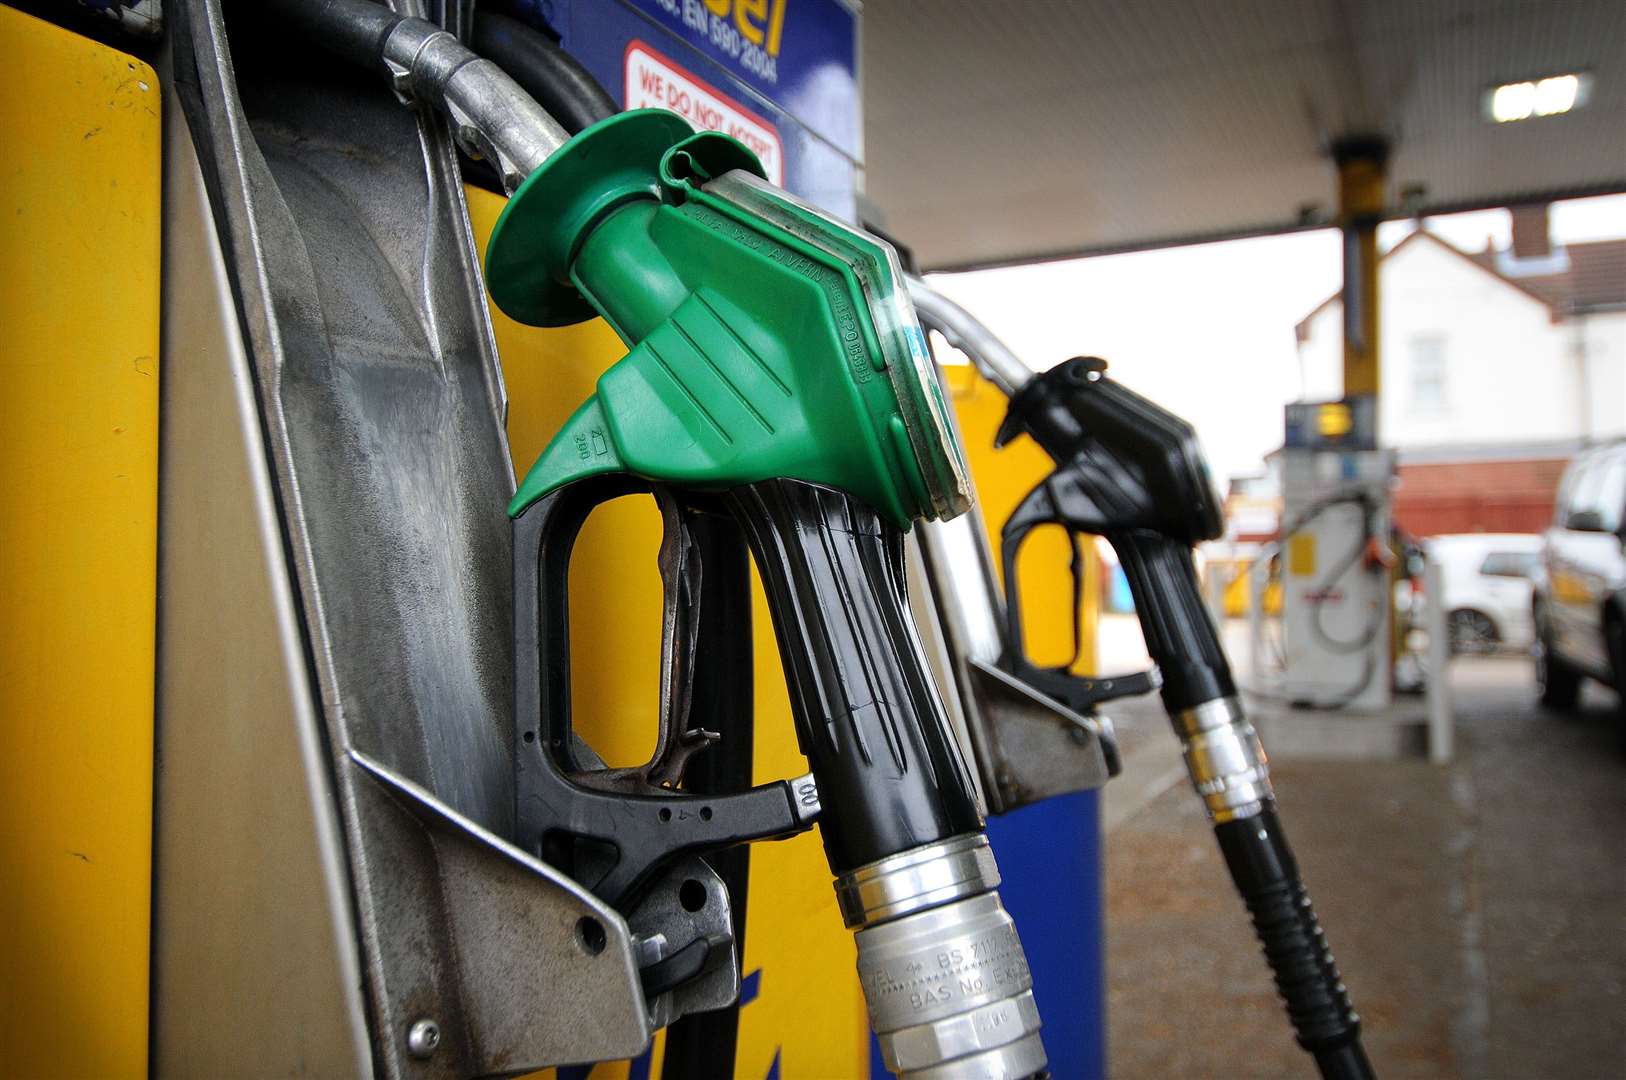 Customers who don't have £100 of available funds may be approved to buy a lesser amount of fuel